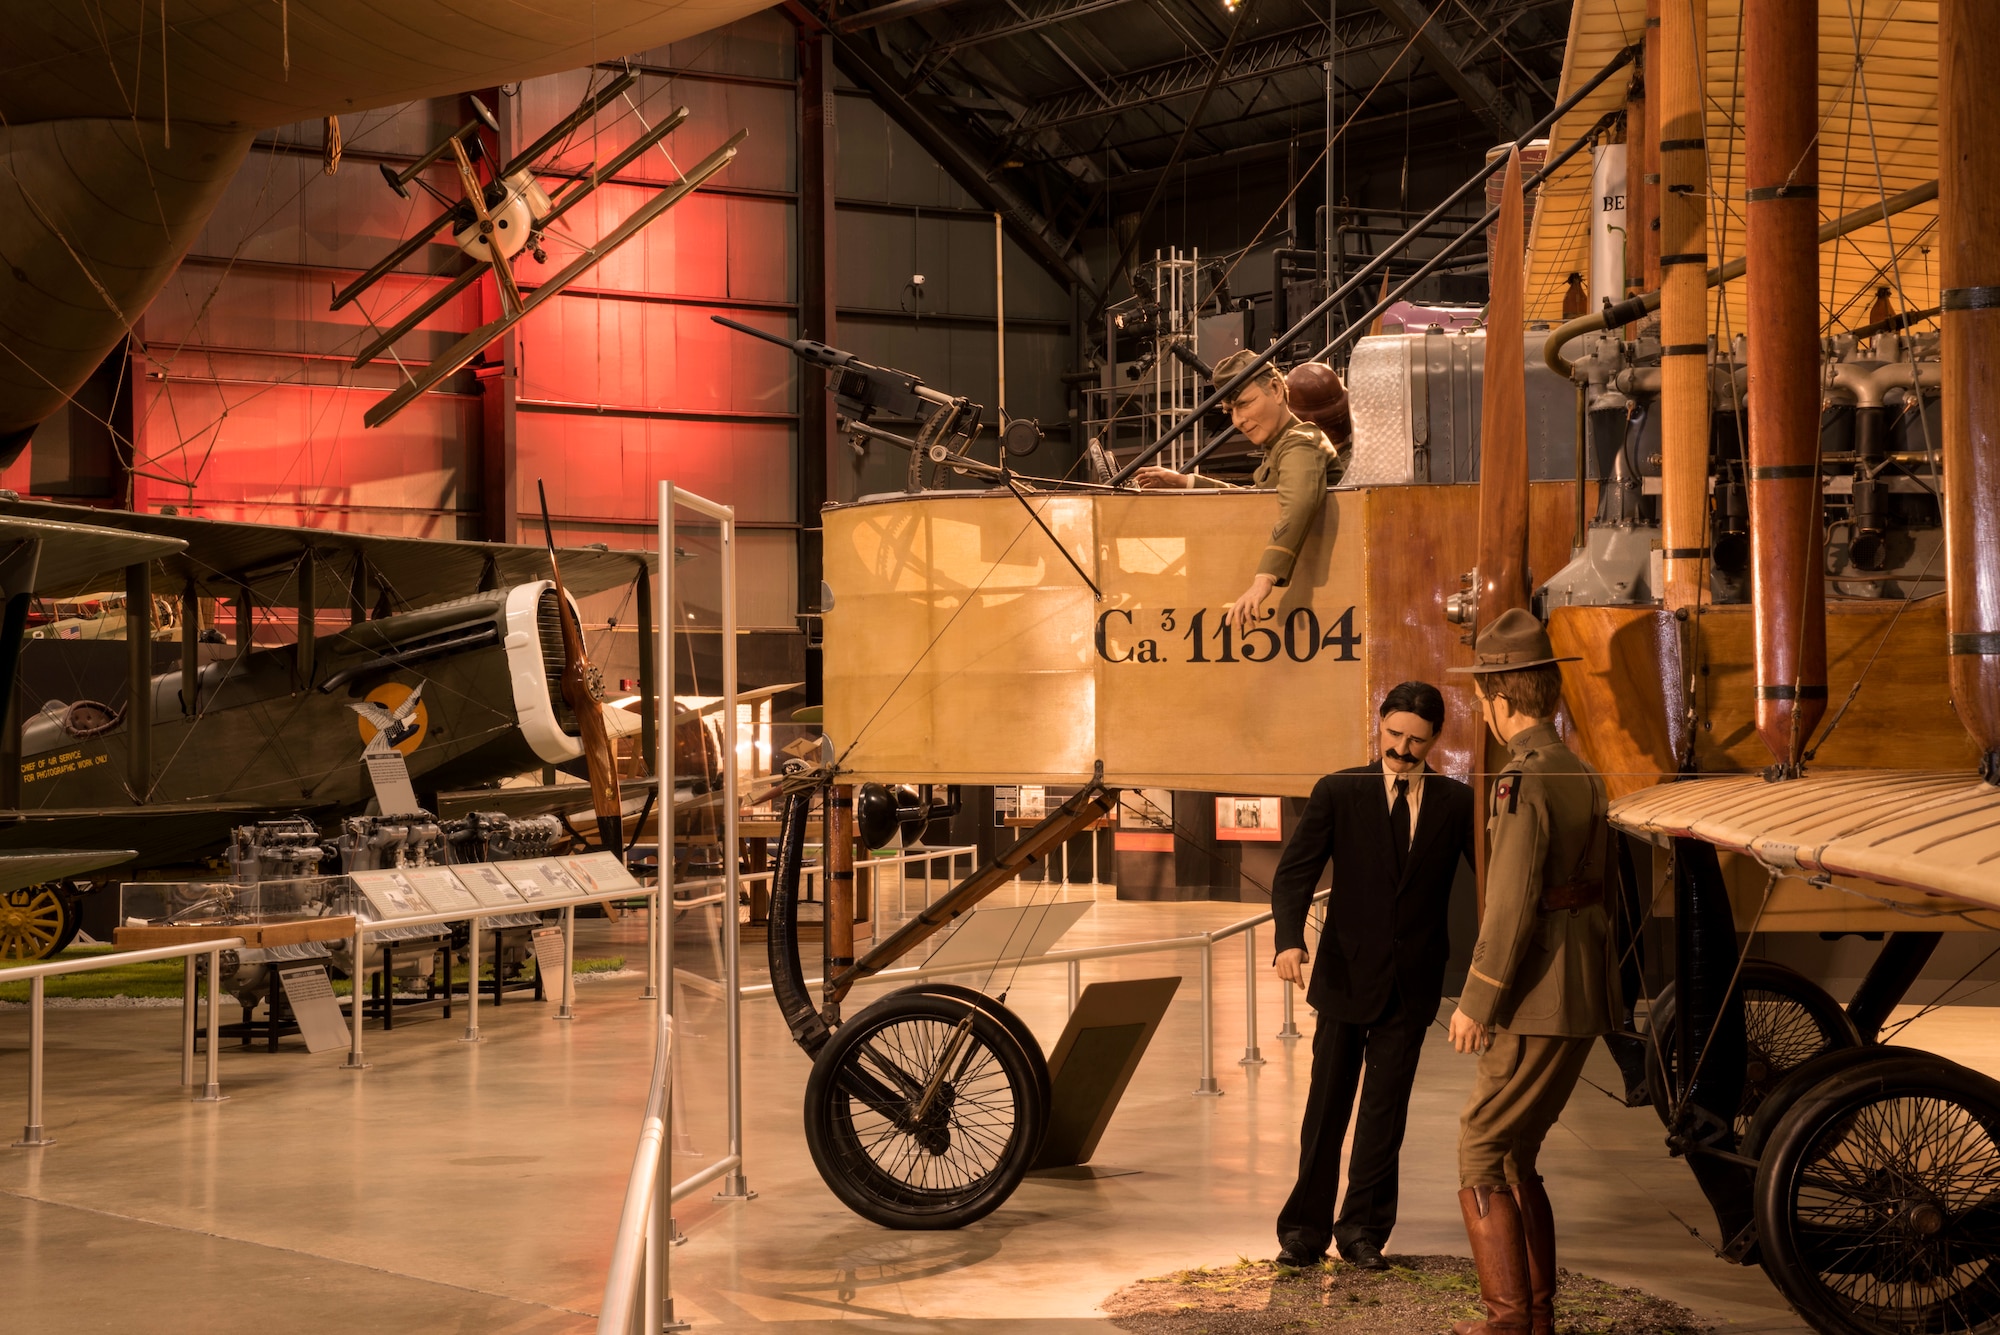 DAYTON, Ohio -- The Early Years Gallery at the National Museum of the United States Air Force. (U.S. Air Force photo by Ken LaRock)